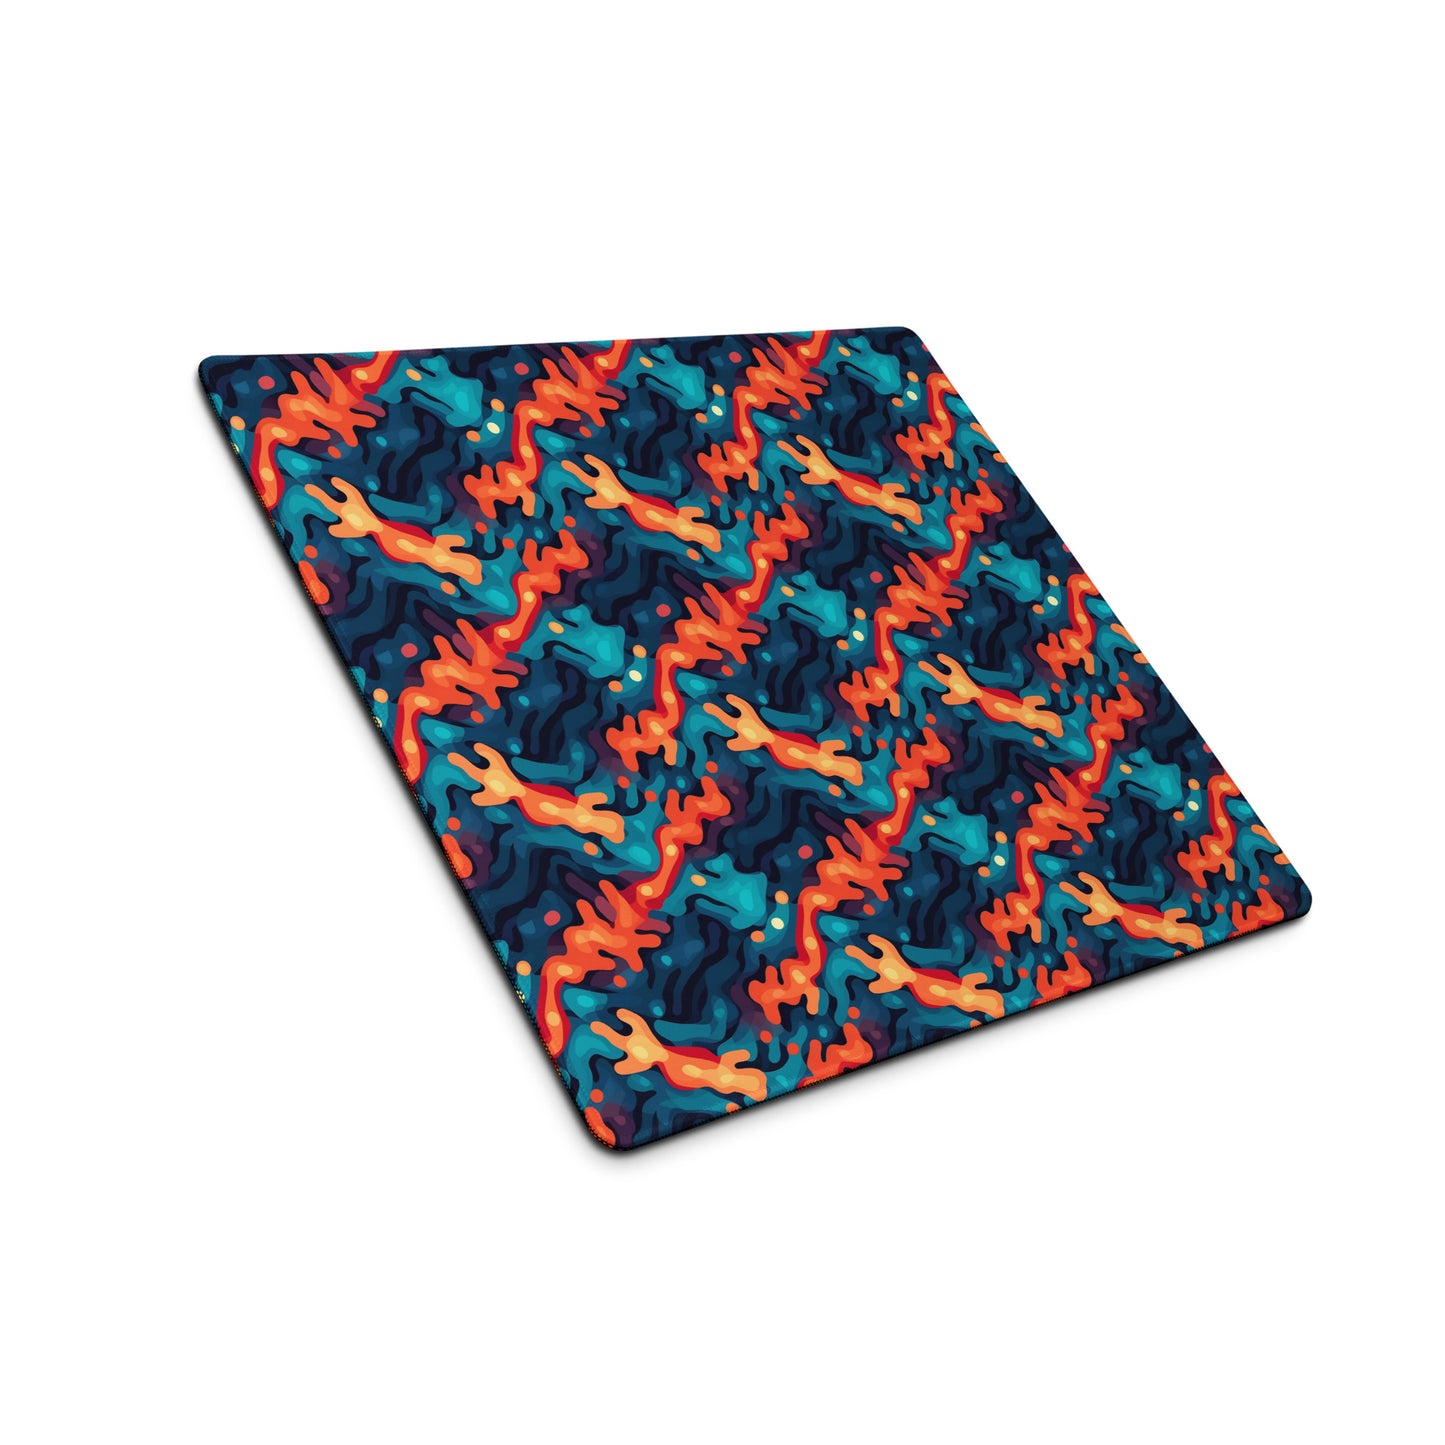 A 18" x 16" desk pad with a wavy woven pattern on it shown at an angle. Red and Blue in color.